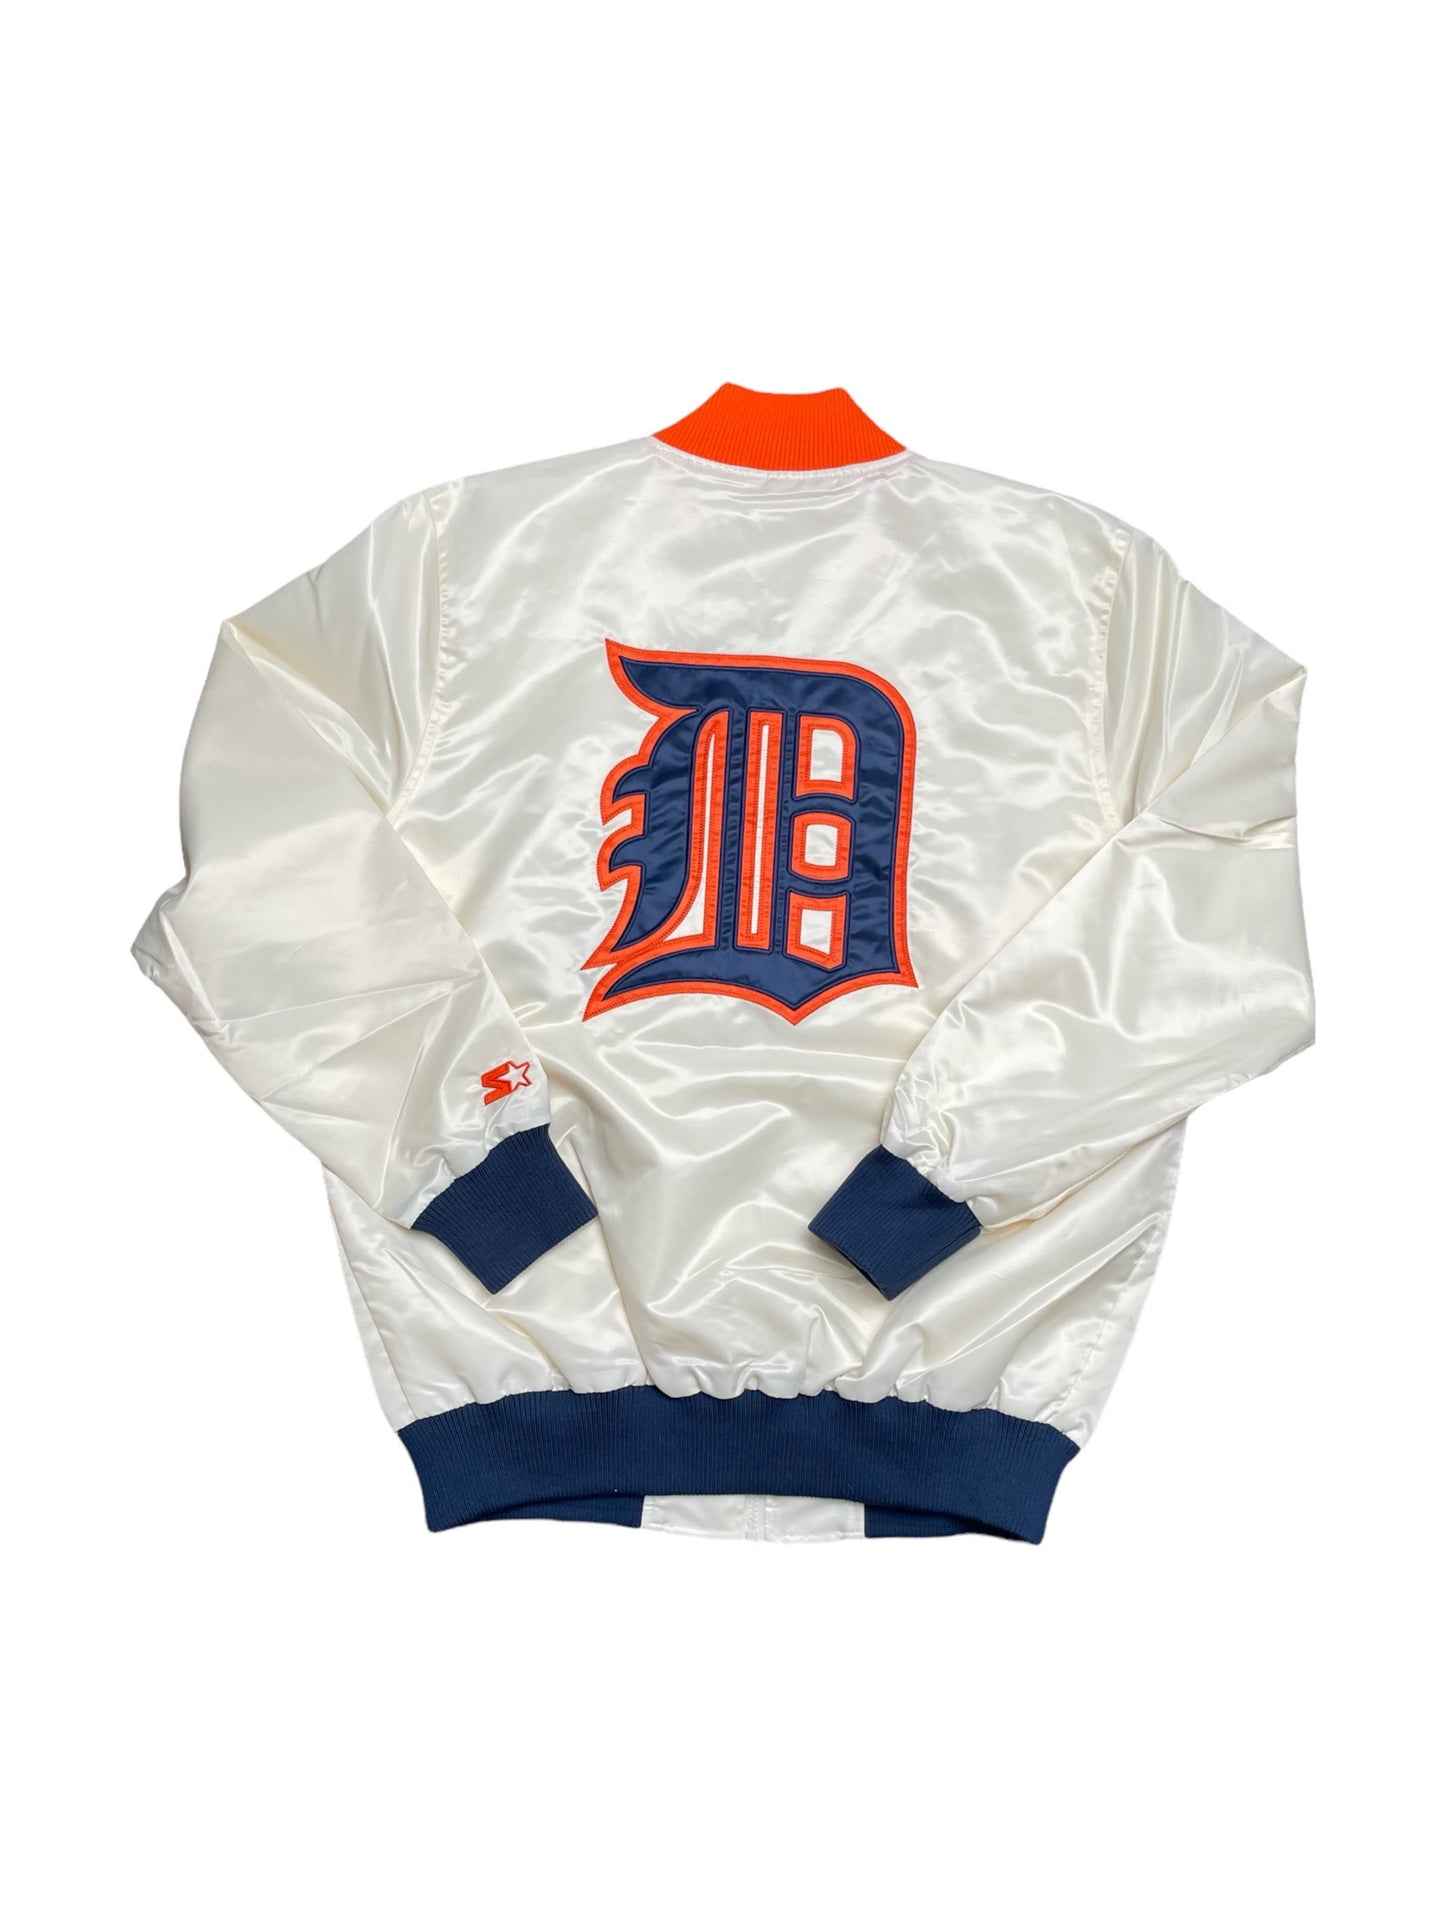 New With Tags Detroit Tigers Starter Jacket Large